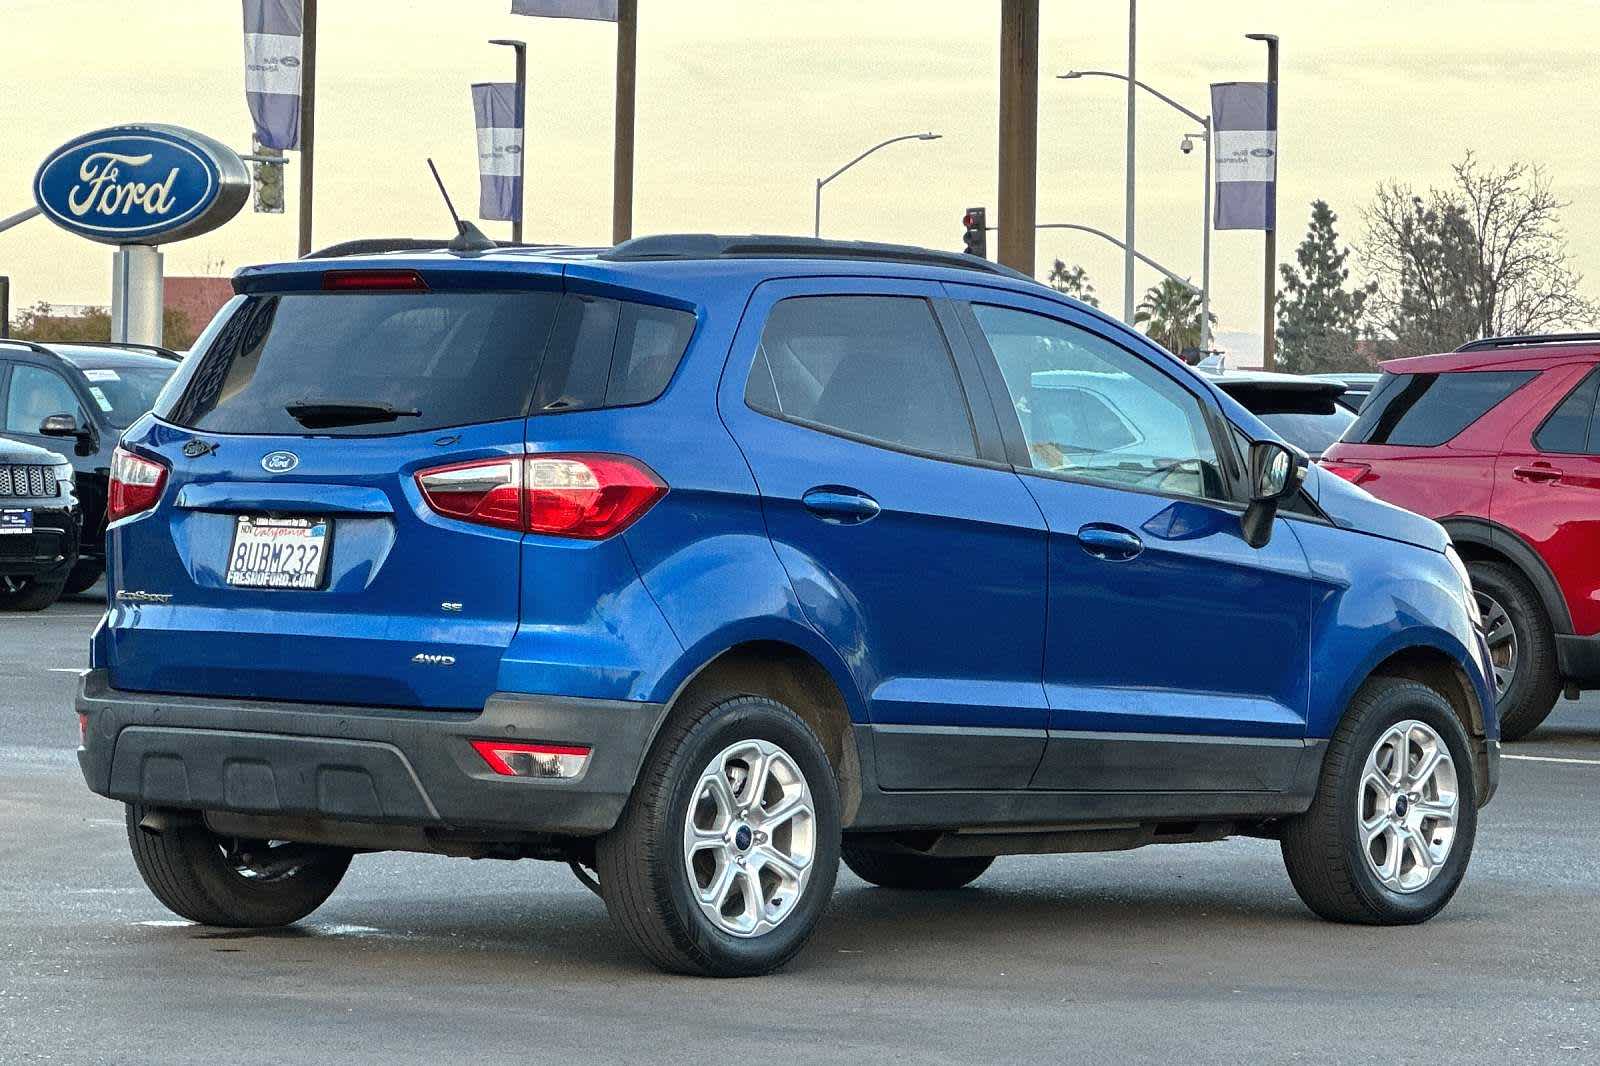 Used Ford EcoSport in Fresno, CA for Sale